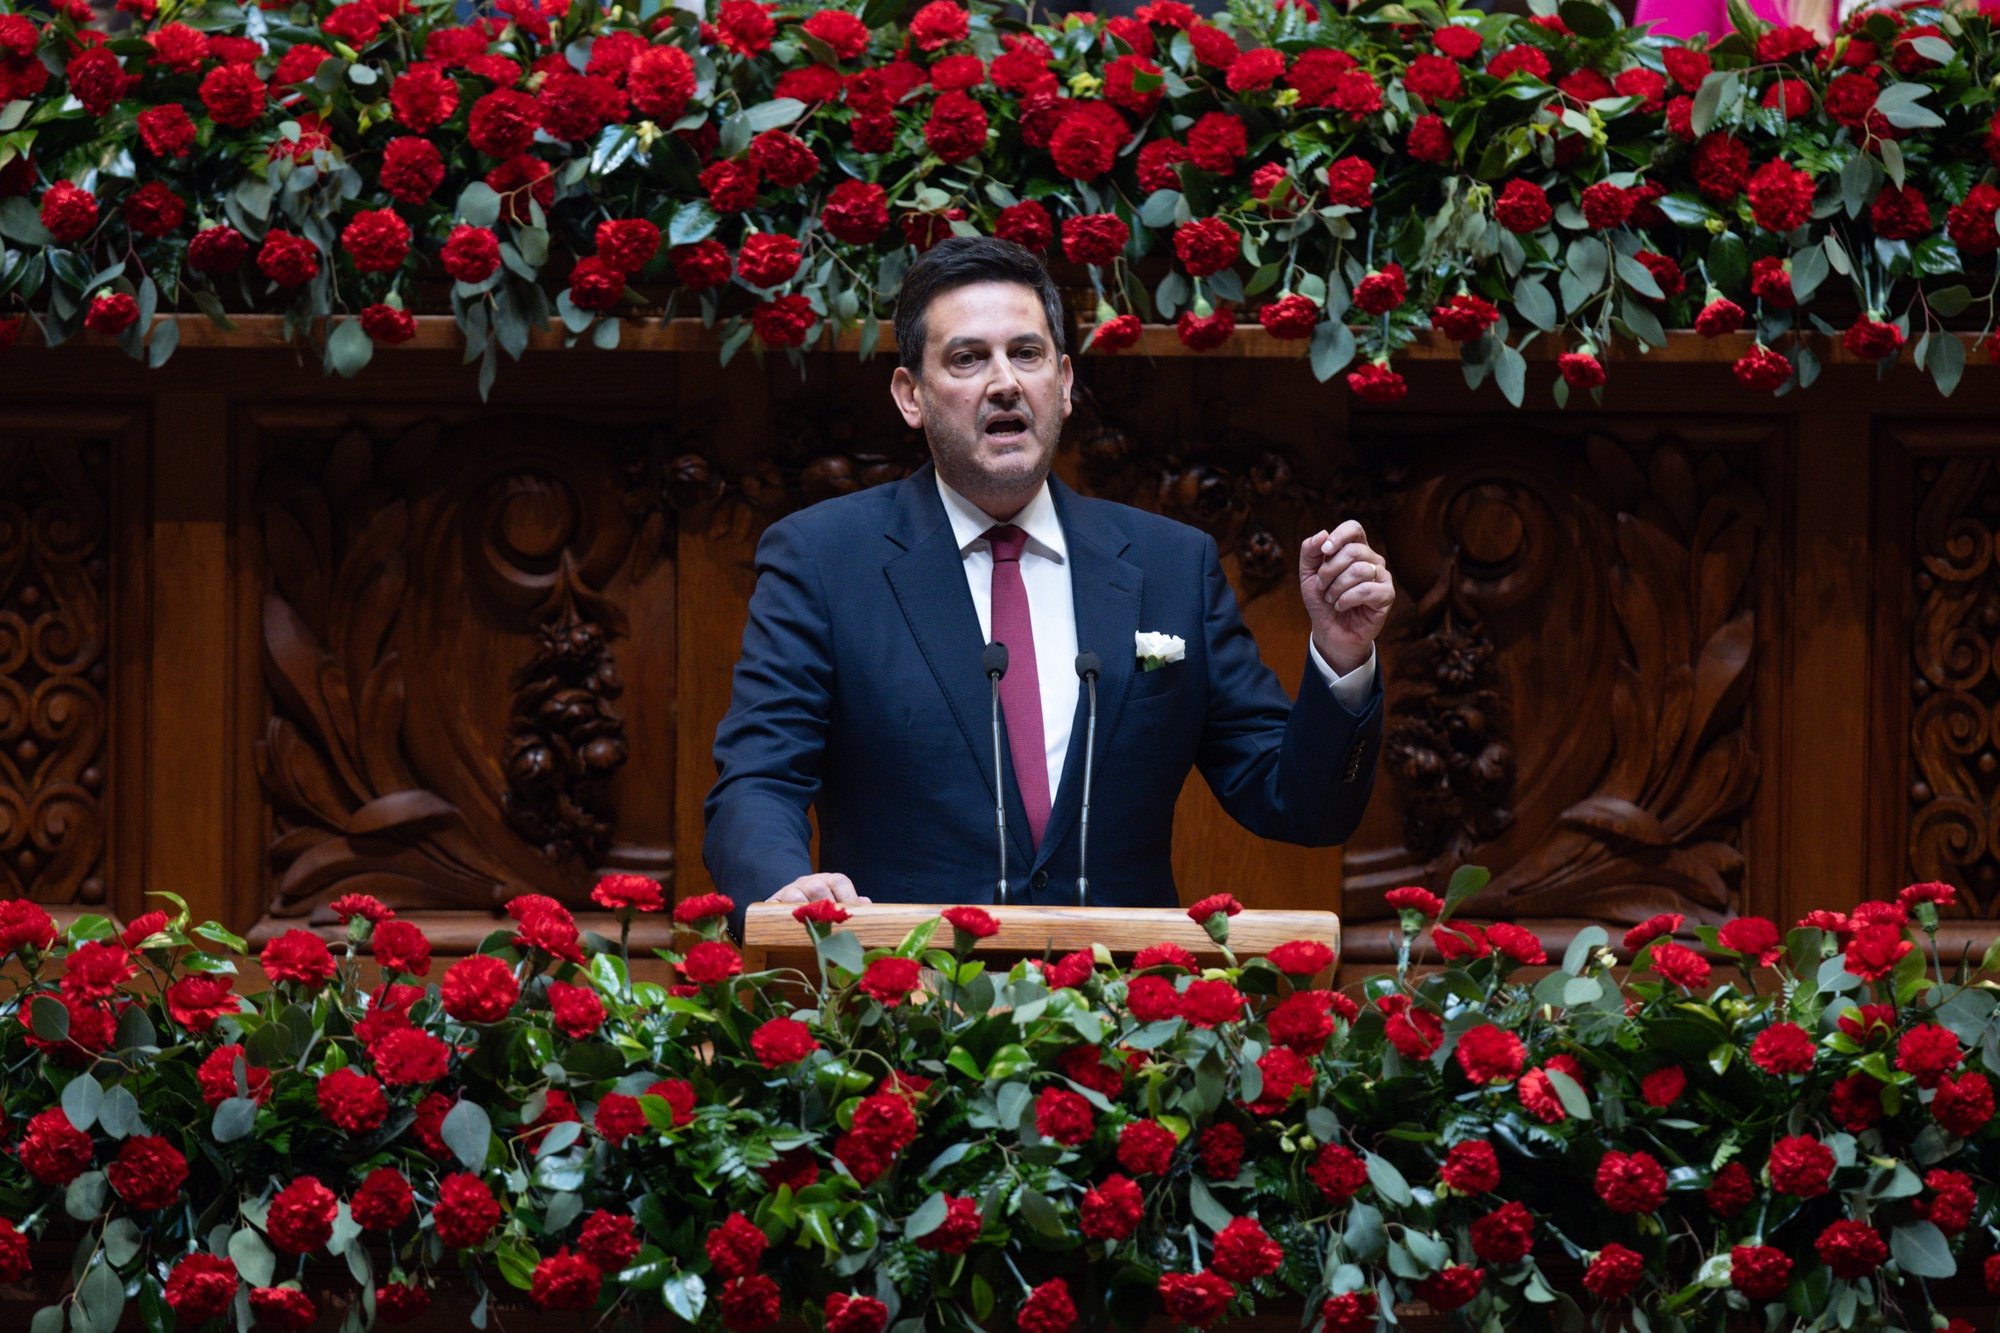 Portuguese leader of the Liberal Initiative (IL), Rui Rocha, delivers a speech during the solemn comemorative session at the Portuguese parliament in Lisbon, Portugal, 25 April 2024. Portugal celebrates the 50th anniversary of the Carnation Revolution that ended the authoritarian regime of Estado Novo (New State) that ruled the country between 1926 to 1974. JOSE SENA GOULAO/LUSA